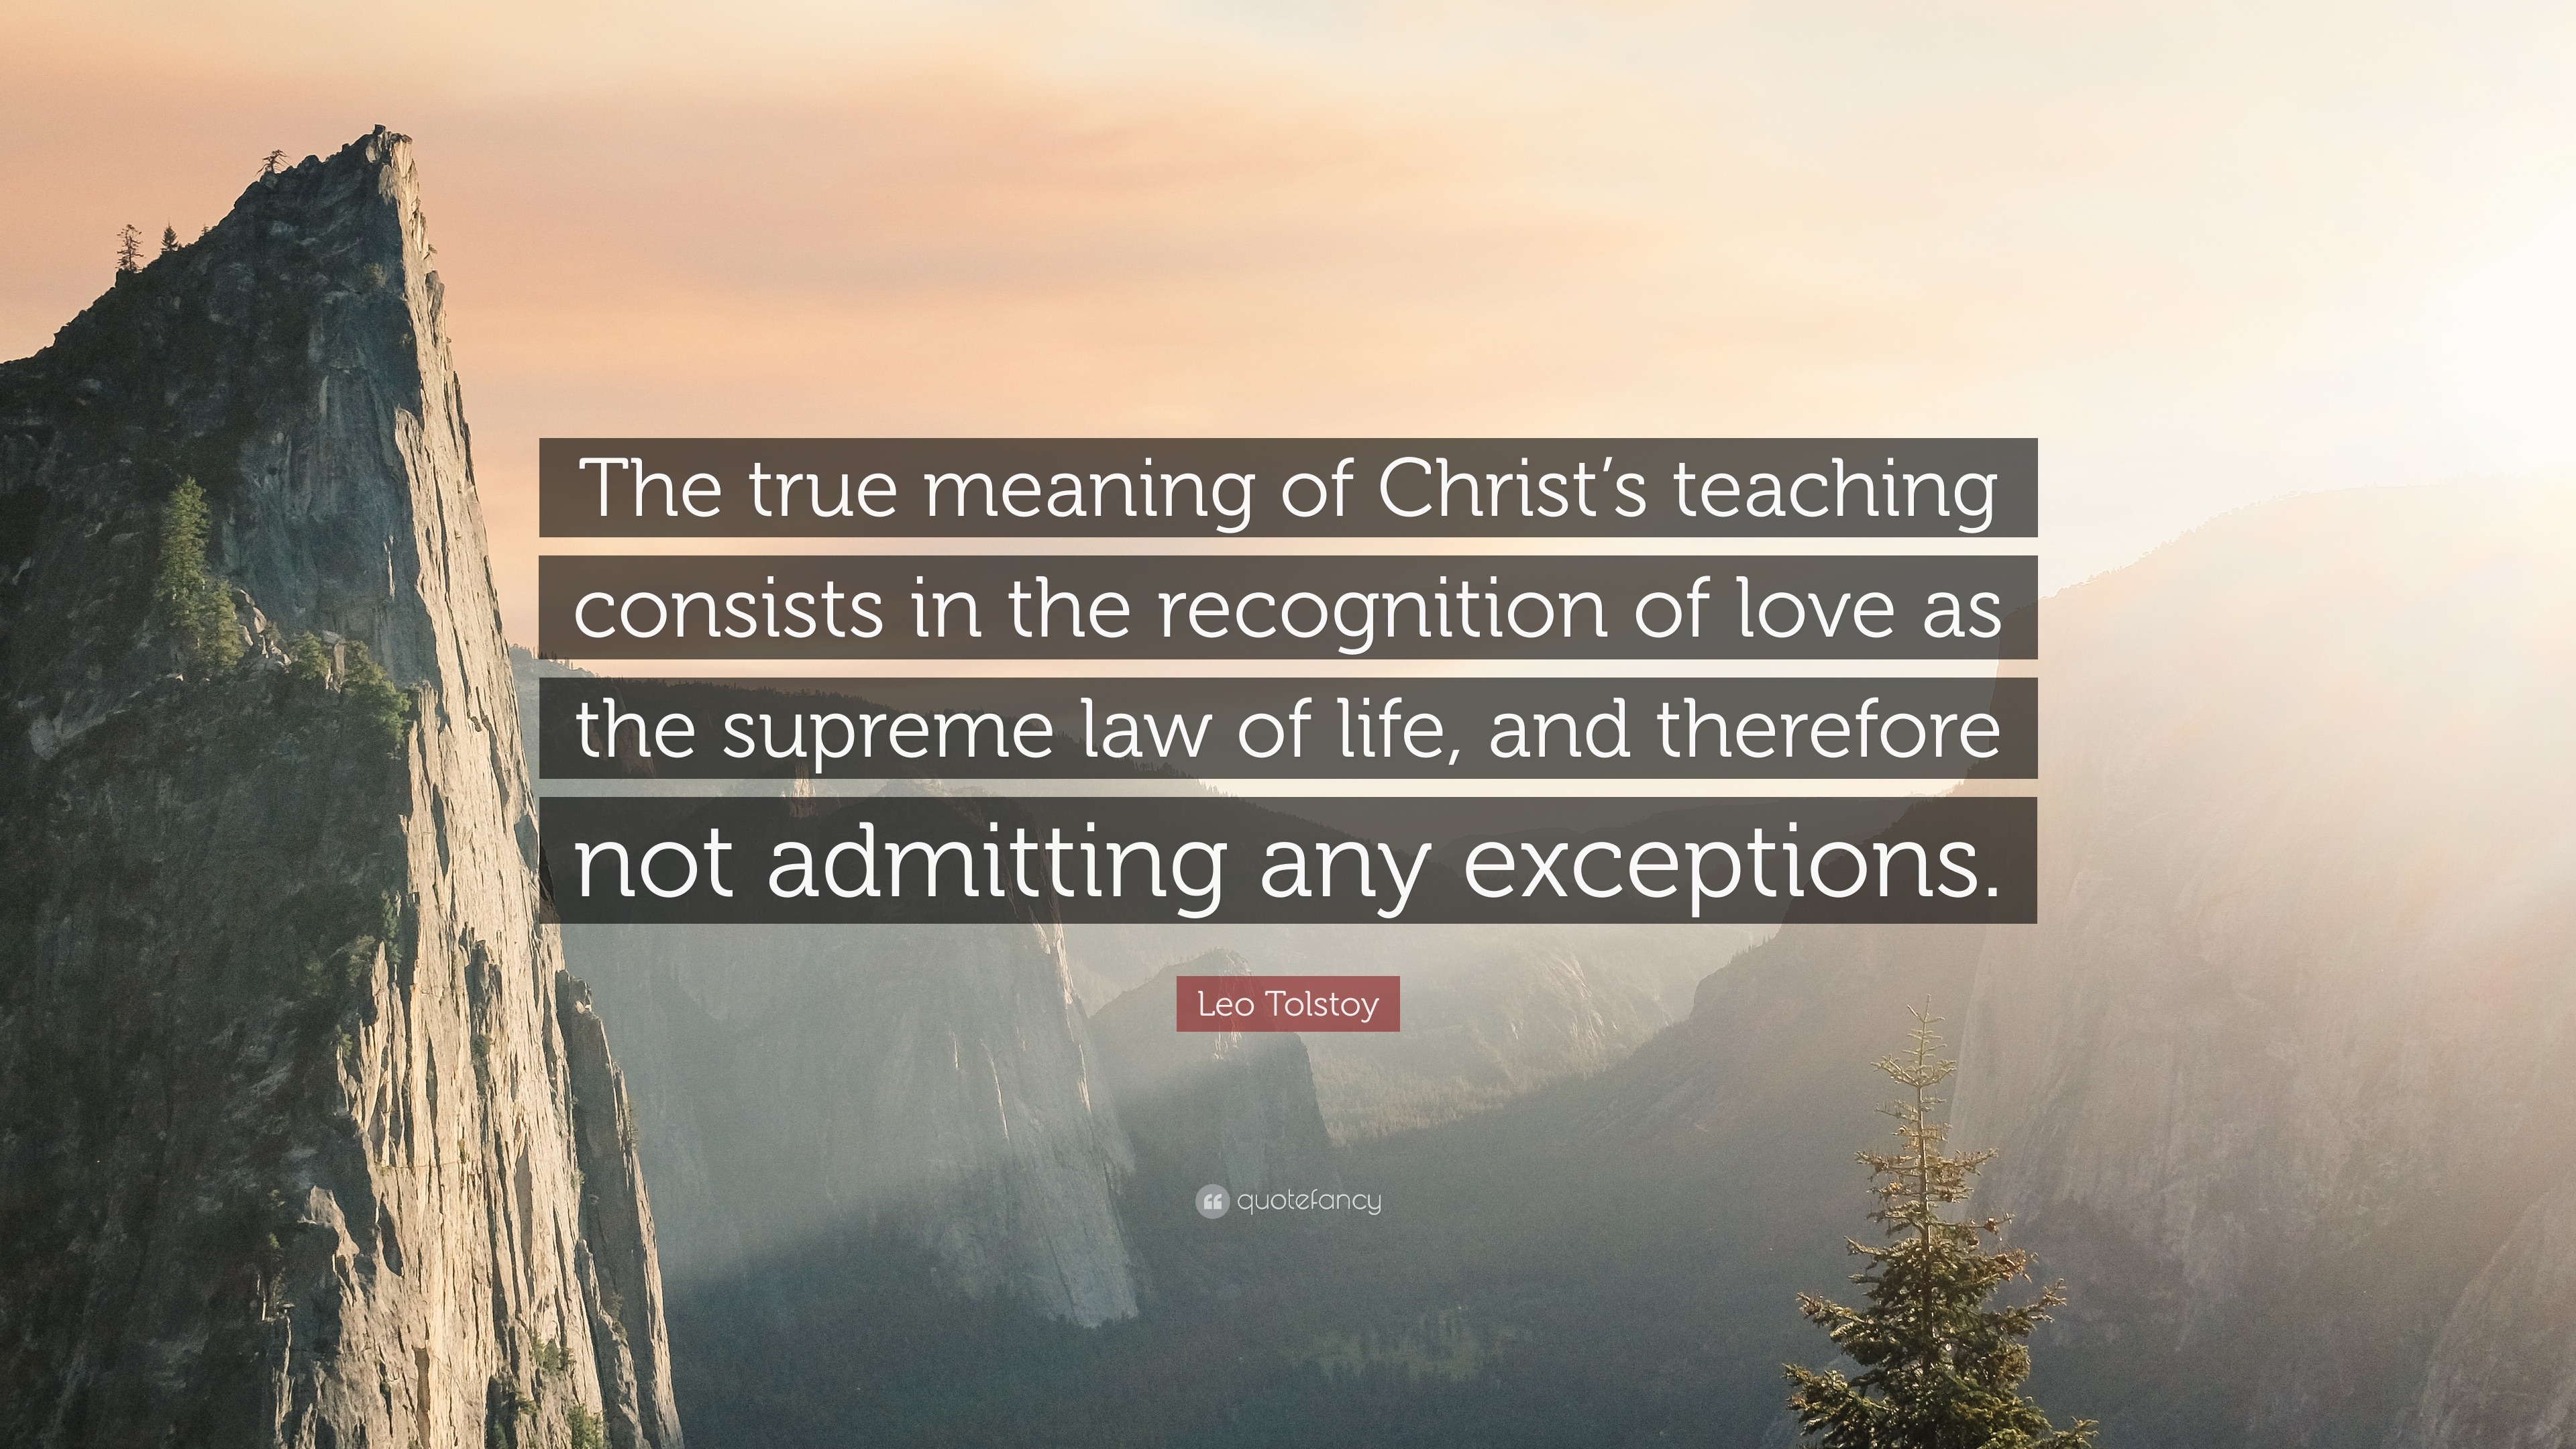 Leo Tolstoy Quote “The true meaning of Christ s teaching consists in the recognition of